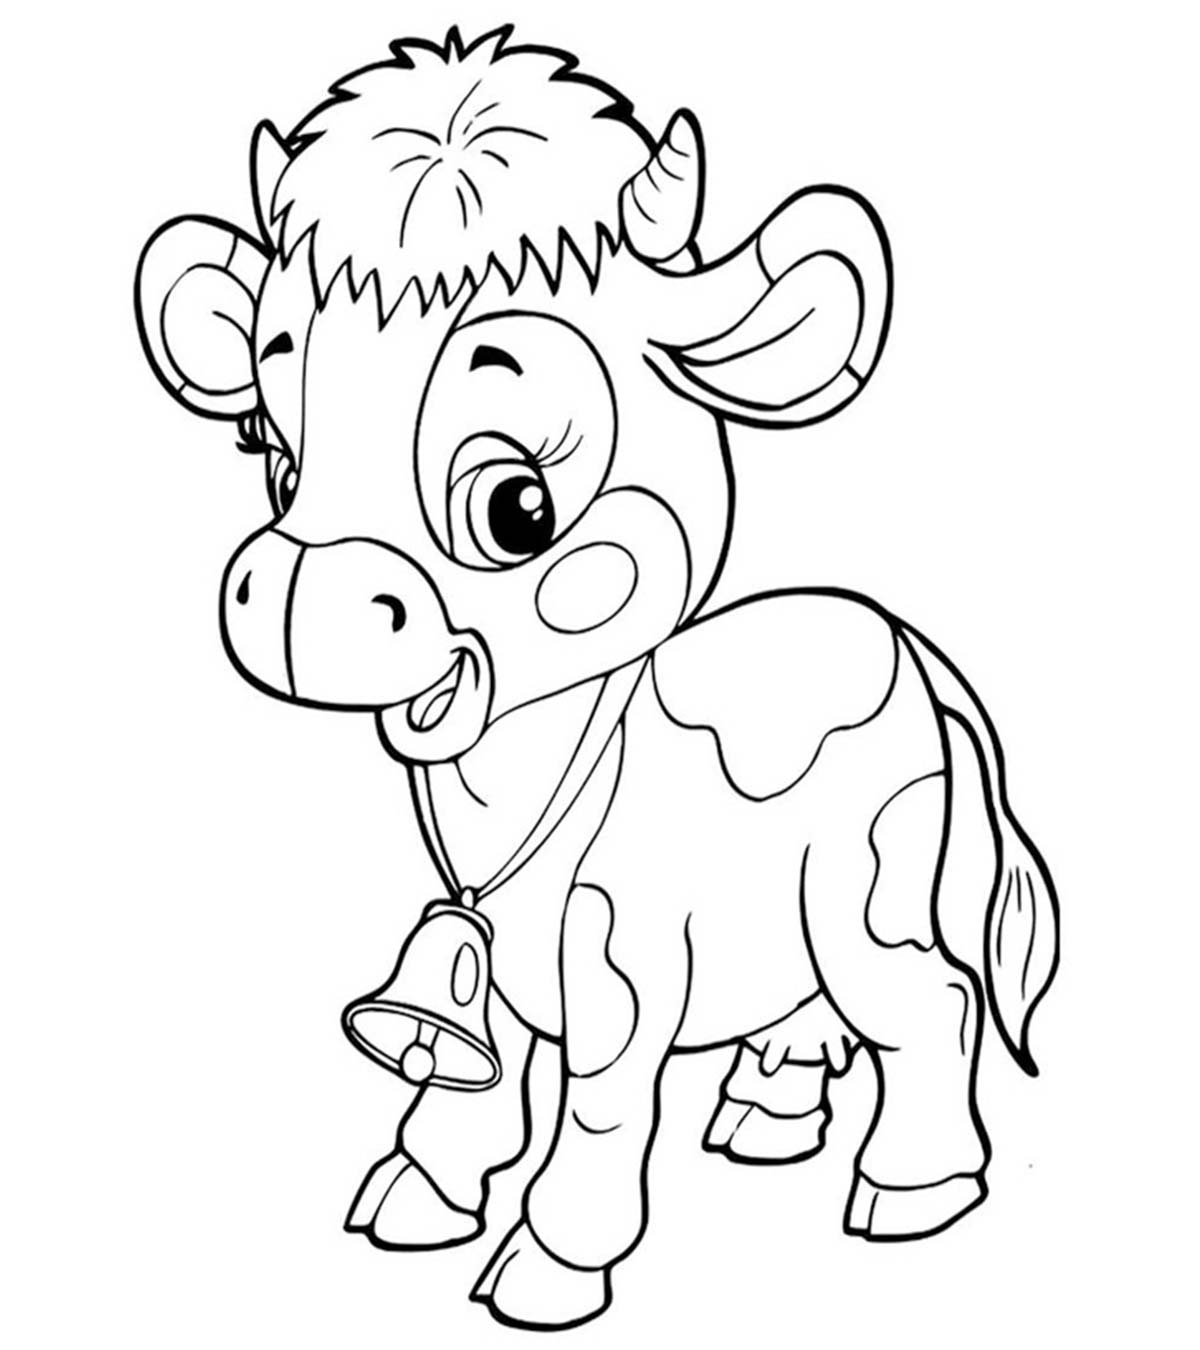 15 Best Cow Coloring Pages For Your Little Ones